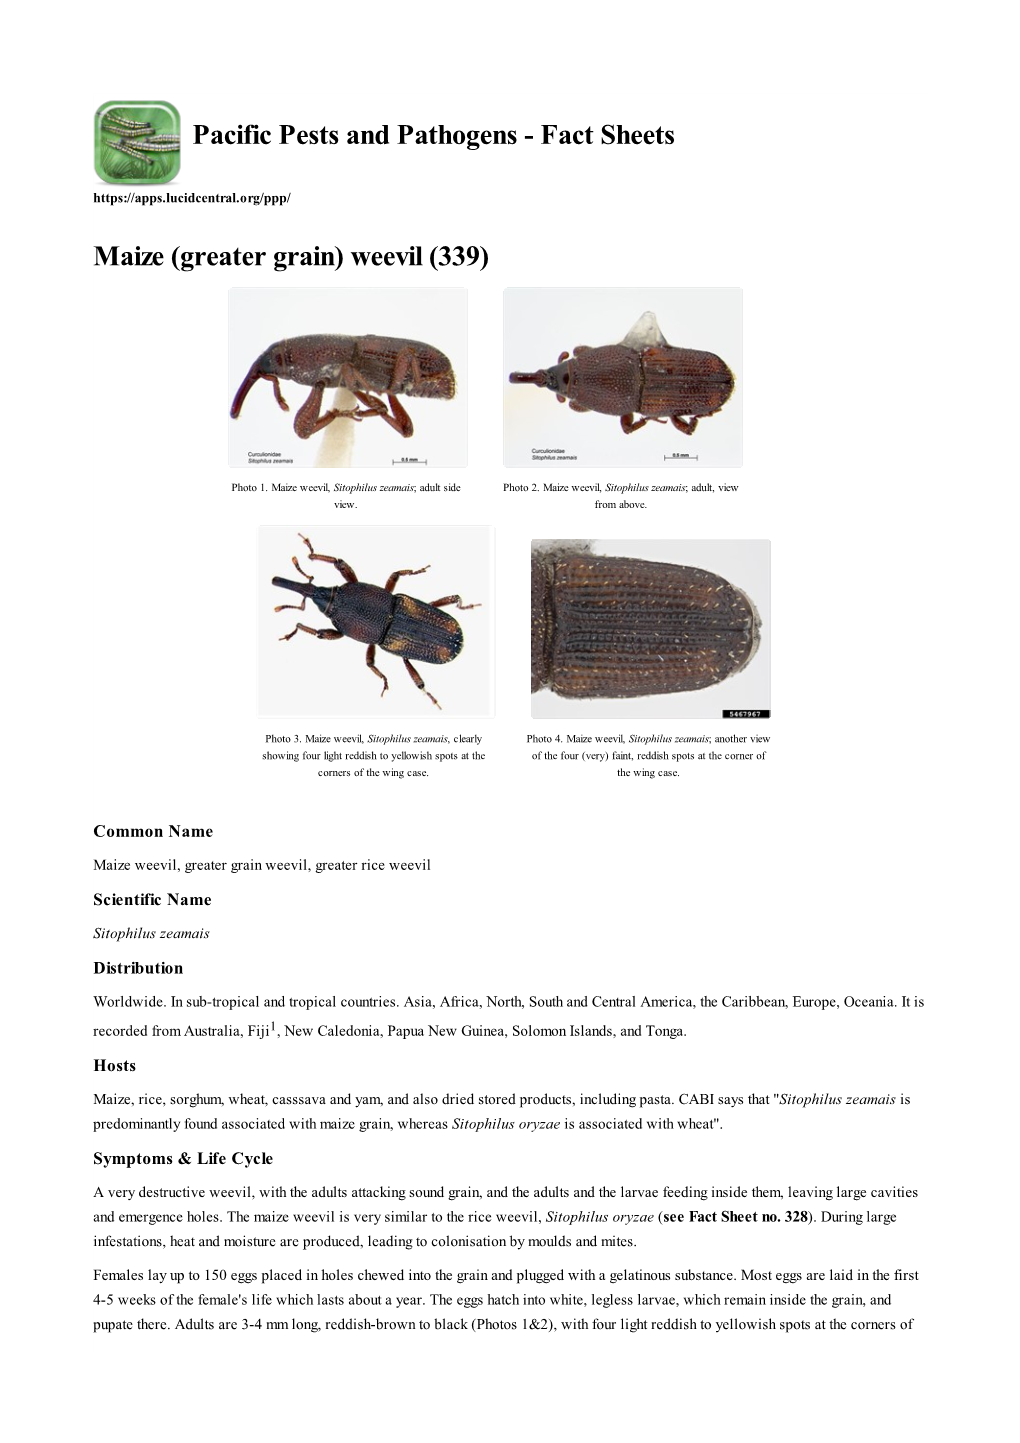 Maize (Greater Grain) Weevil (339)